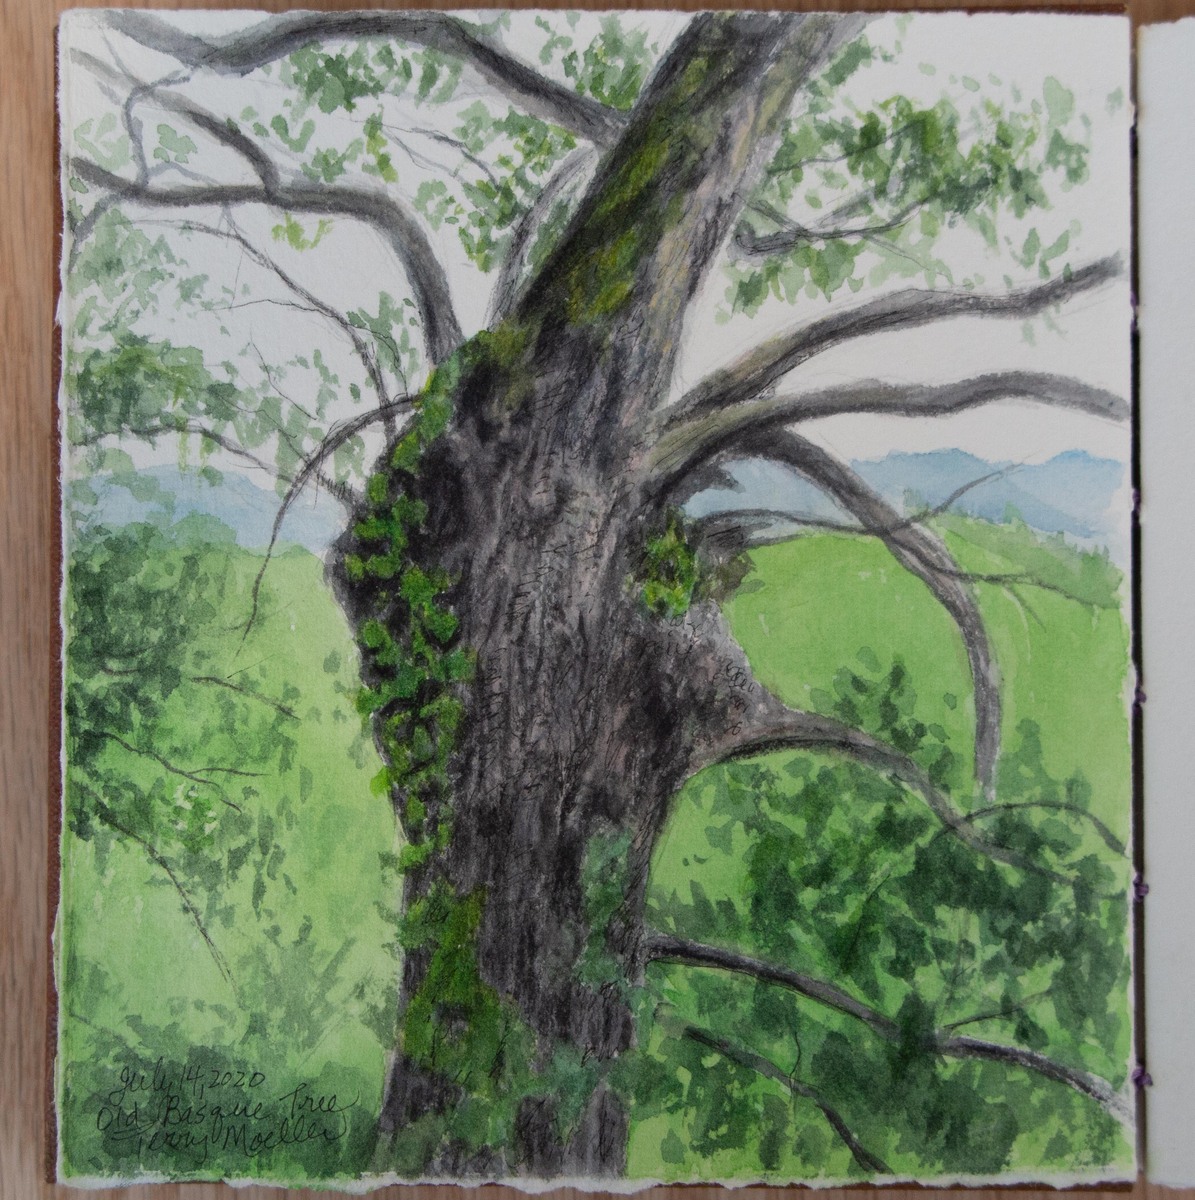 Sketchbook page     "An Old Basque Tree"     6.5" X 6"     watercolor with pen